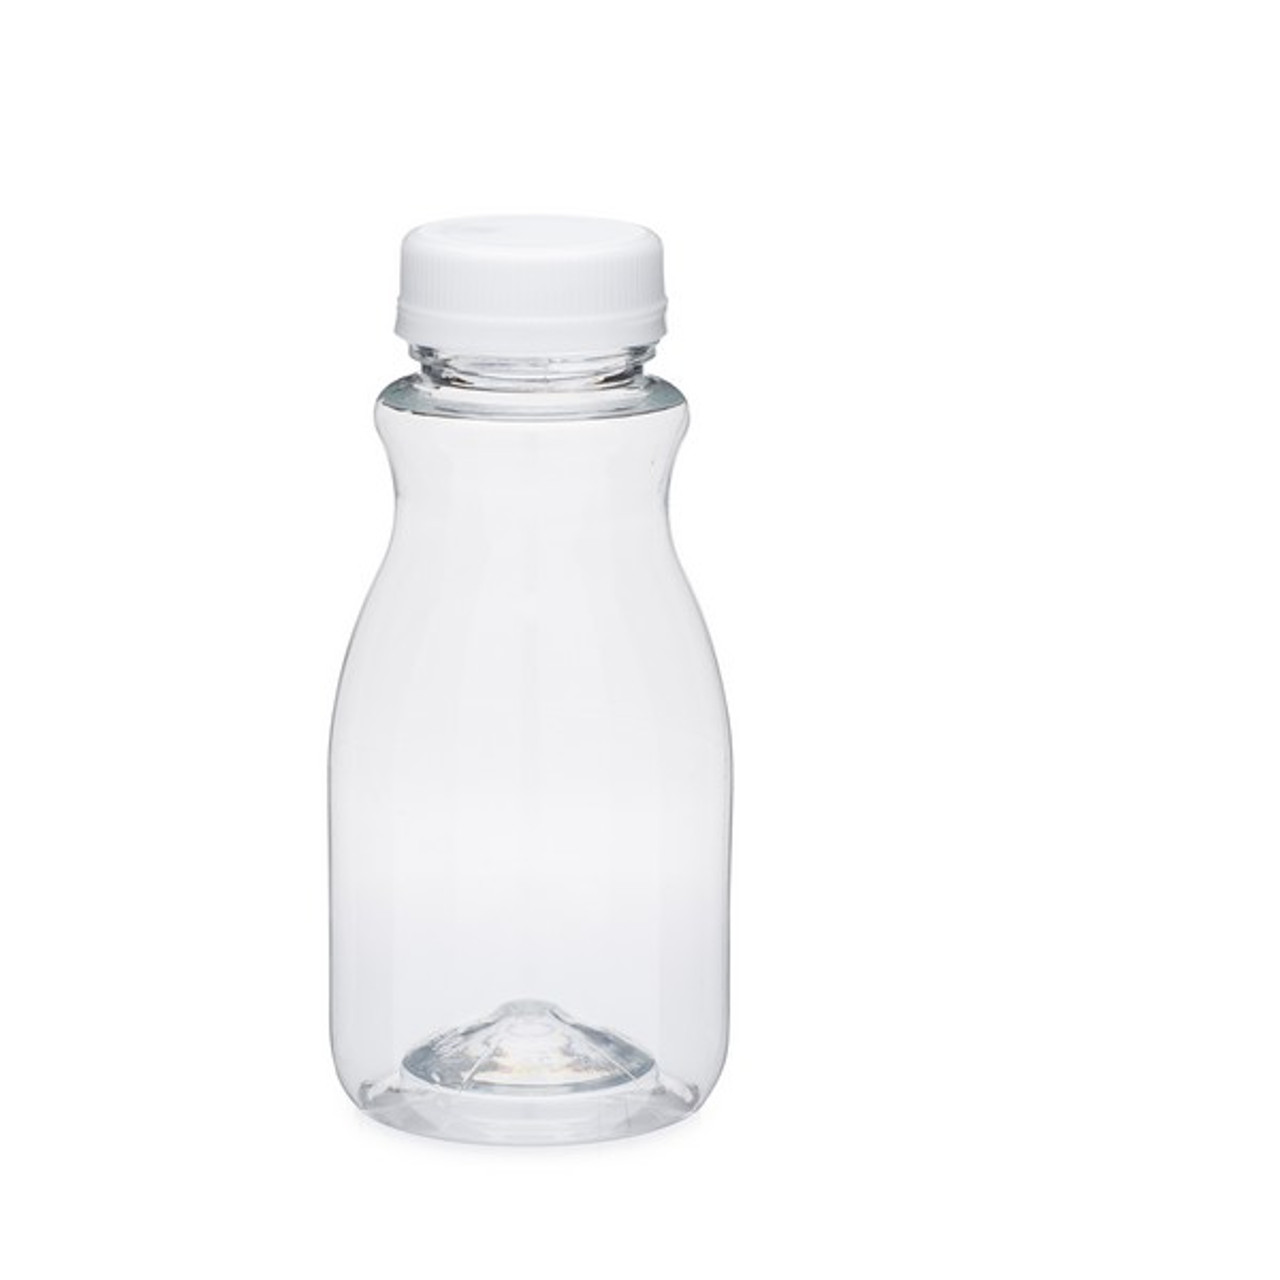 32 oz. Round PET Clear Juice Bottle with Lid